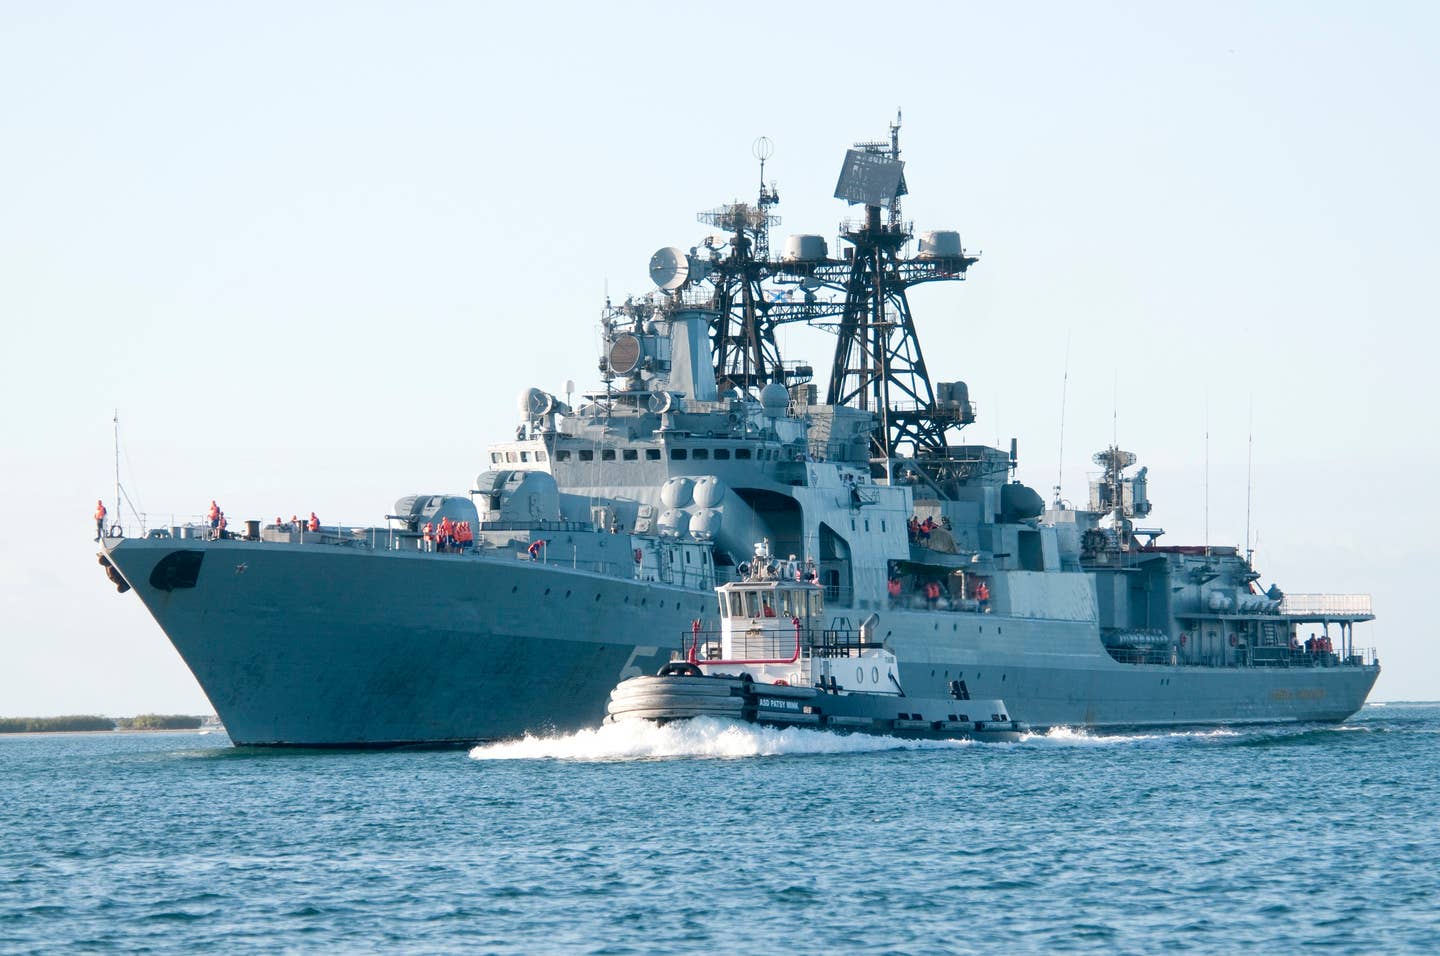 The Russian Navy Udaloy-class destroyer RFS Admiral Panteleyev (BPK 548)  arrives at Joint Base Pearl Harbor-Hickam to participate in the Rim of the Pacific (RIMPAC) exercise 2012. <em>U.S. Navy photo by Mass Communication Specialist 3rd Class Sean Furey/Released</em>